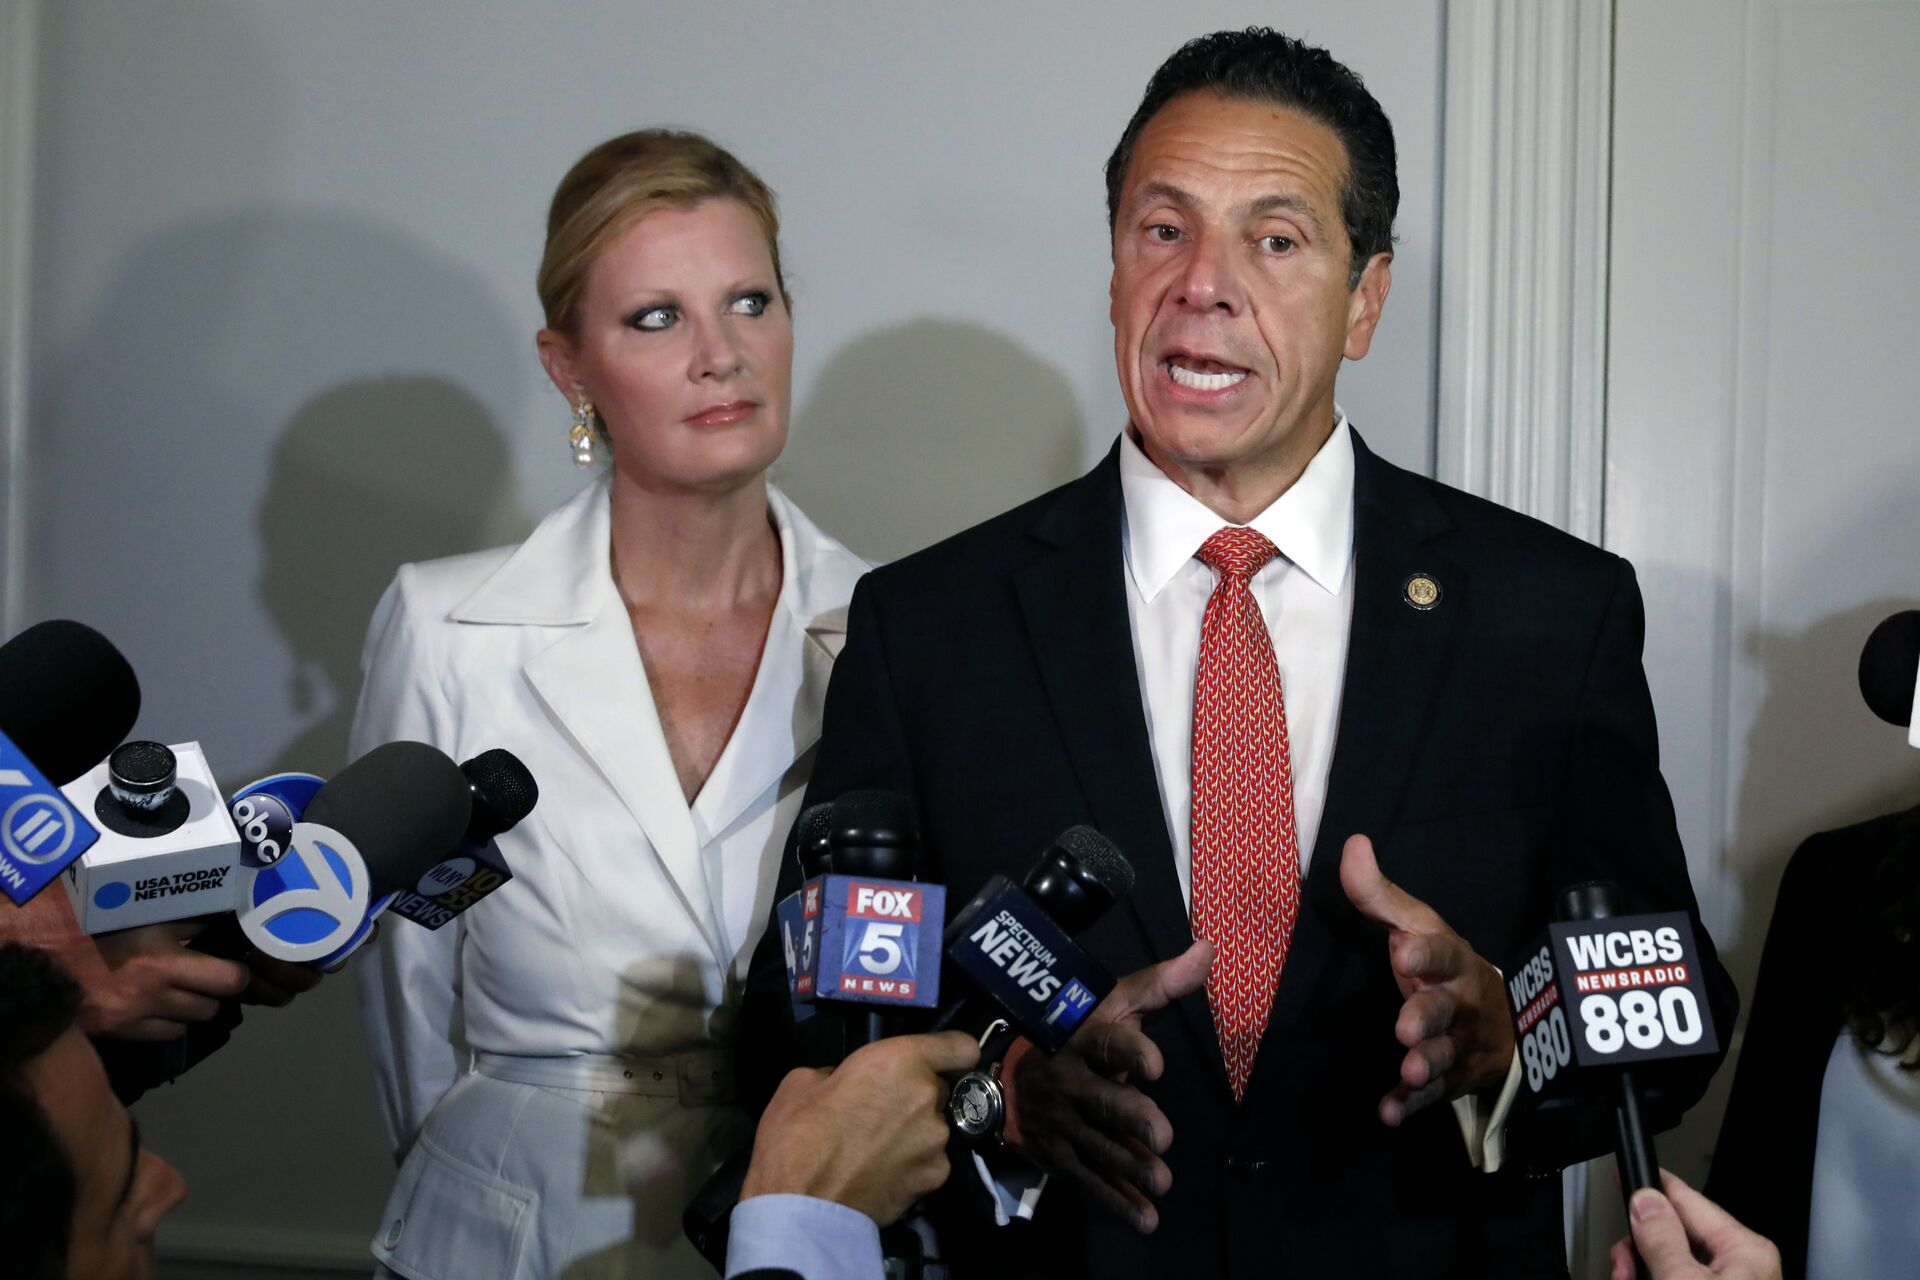 'Toxic' Cuomo Was Cheating on His Longtime Girlfriend Sandra Lee With Aides, Former Staffers Claim  - Sputnik International, 1920, 05.04.2021